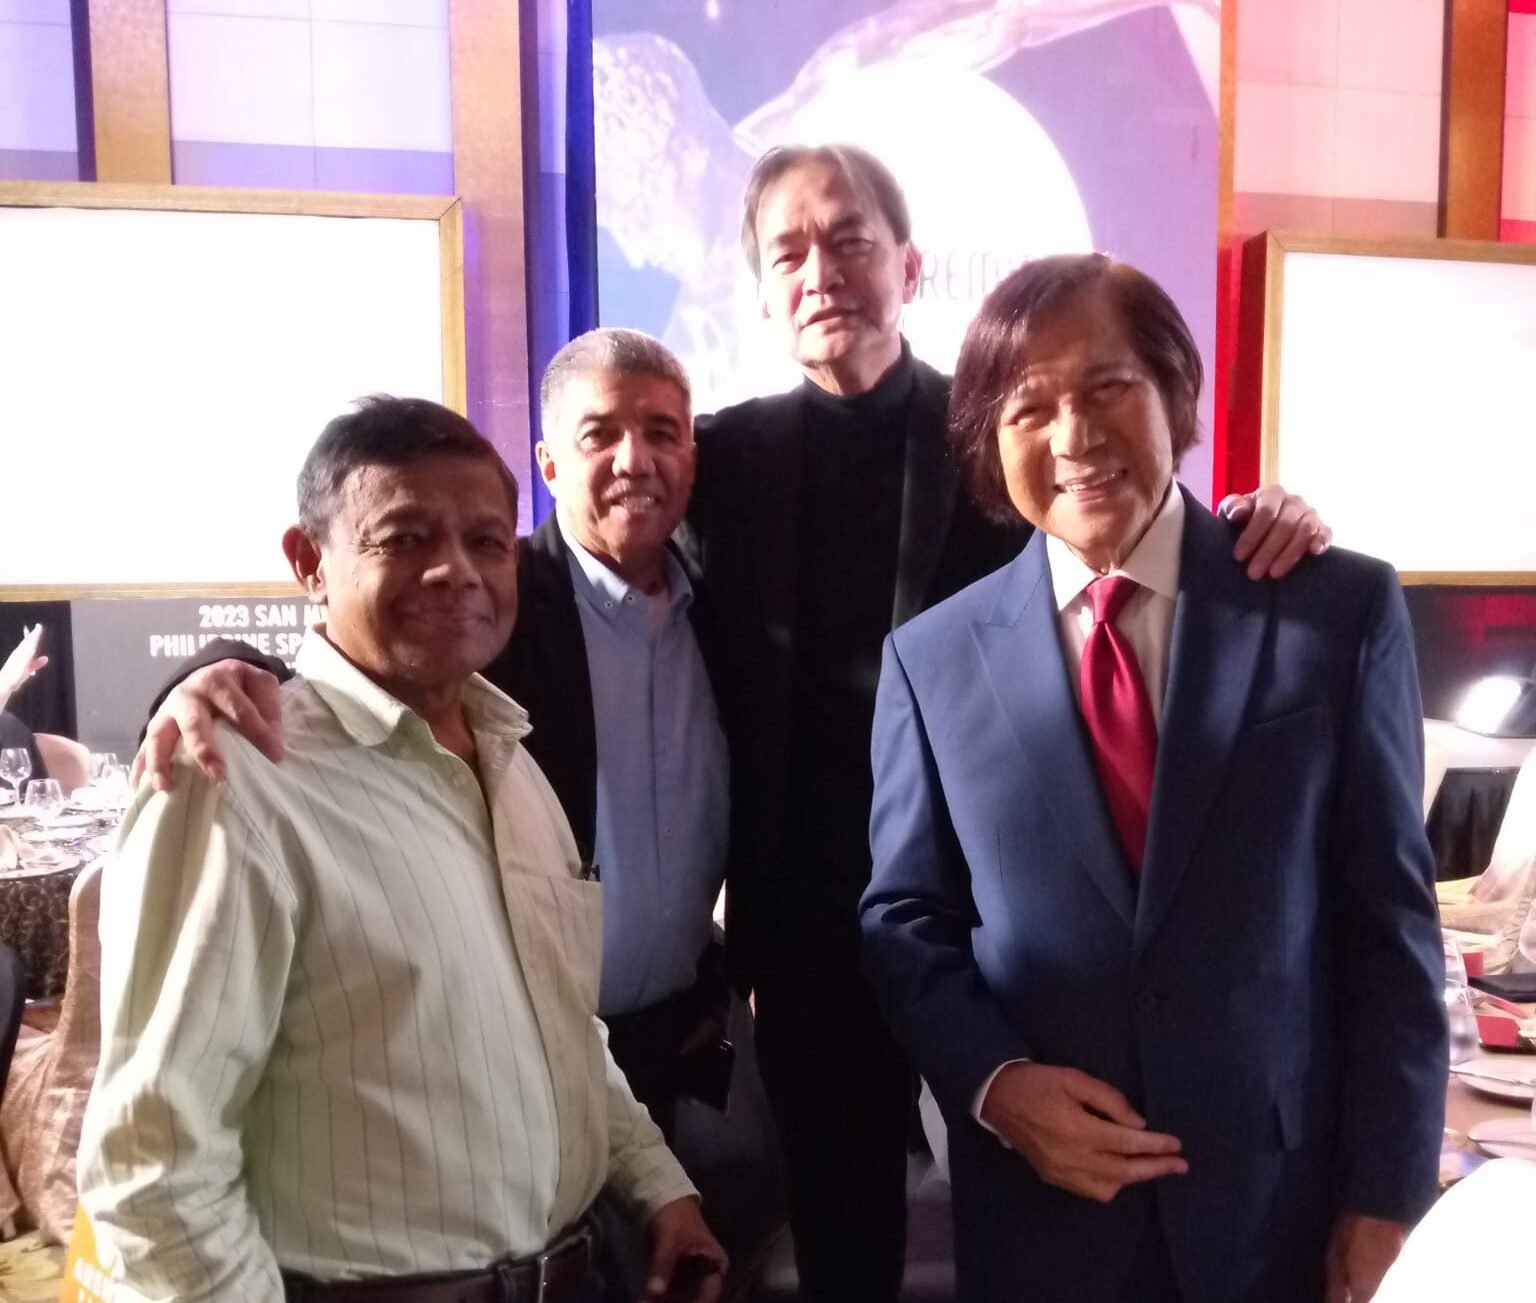 with former PBA coach Dante Silverio and 1976 PBA Rookie of the Year GIl Cortez.